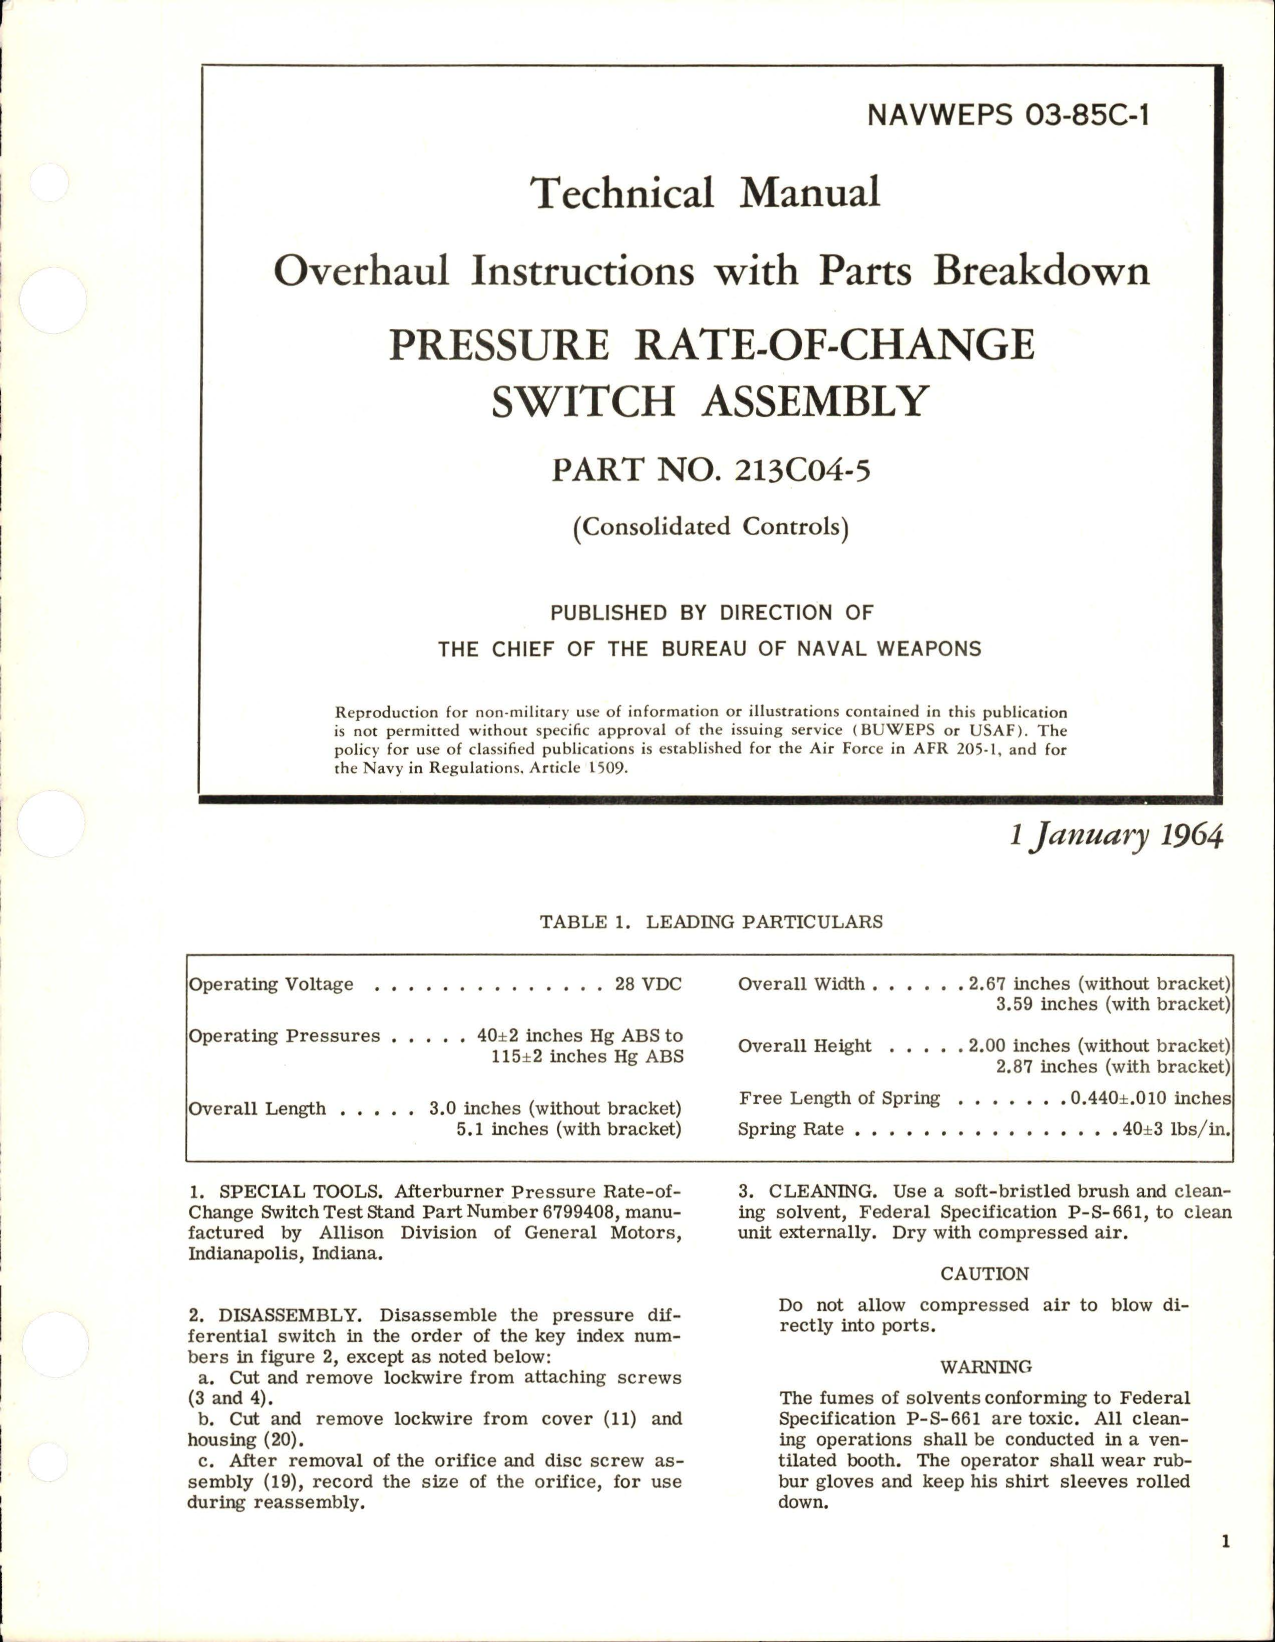 Sample page 1 from AirCorps Library document: Overhaul Instructions with Parts Breakdown for Pressure Rate-of-Change Switch Assembly - Part 213C04-5 